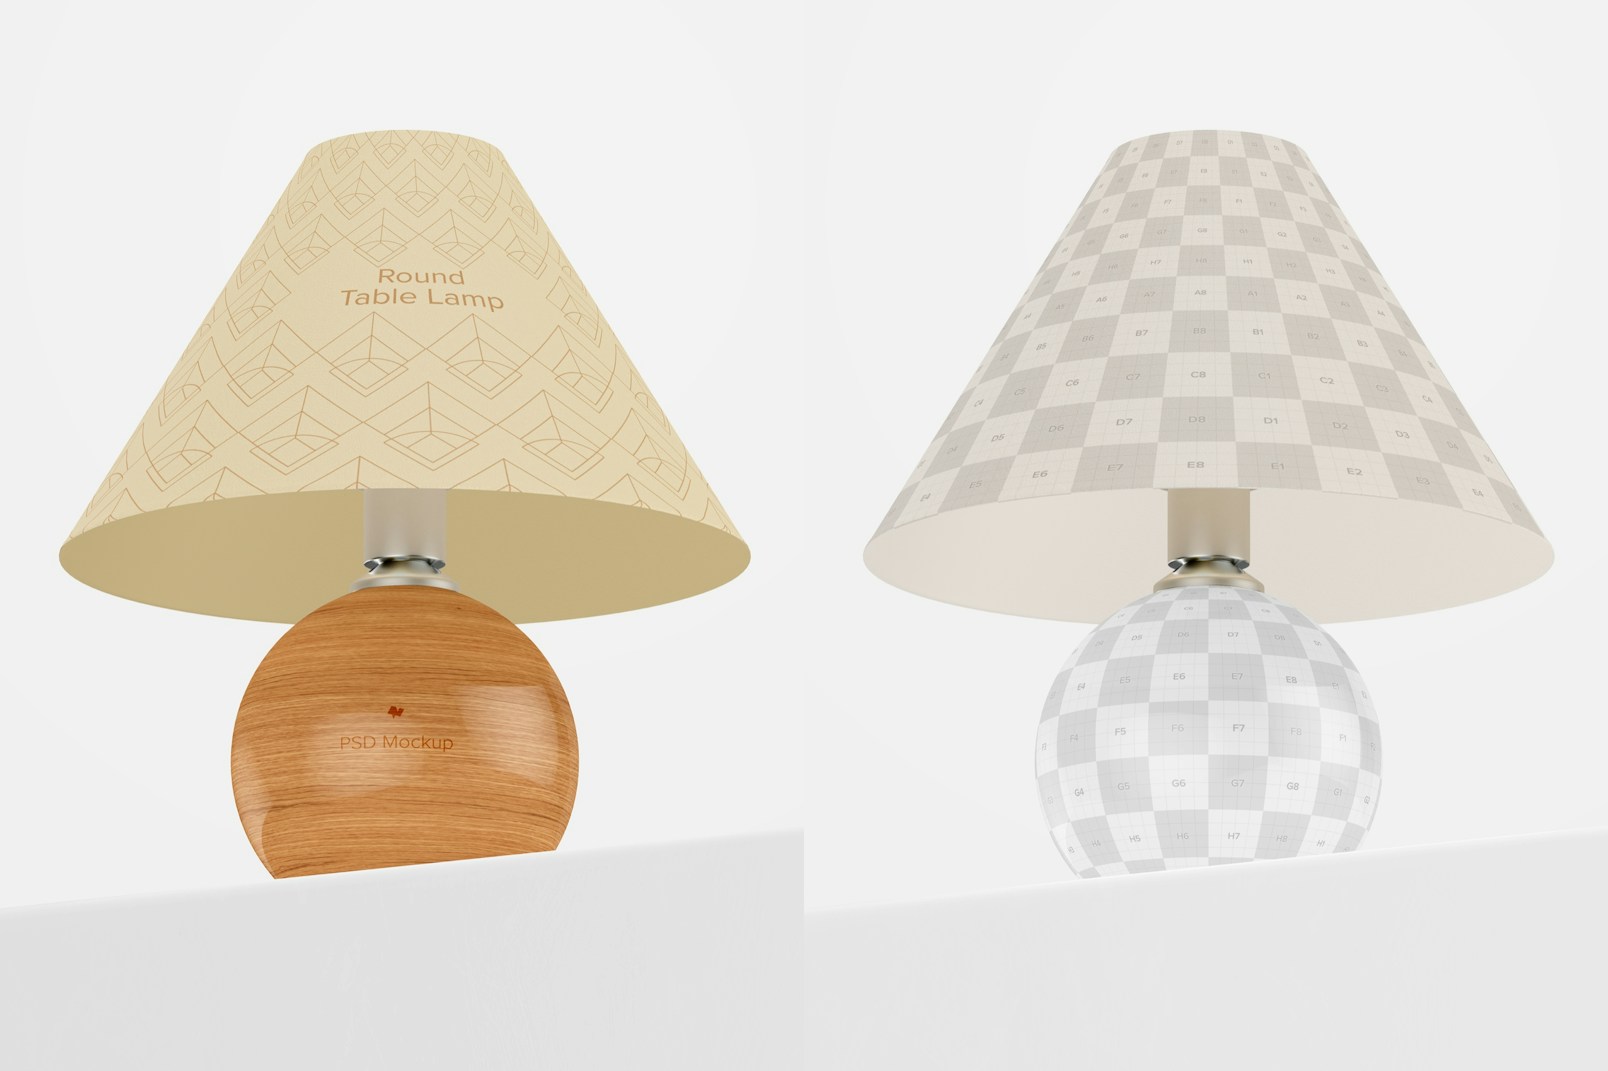 Round Table Lamp Mockup, Low Angle View